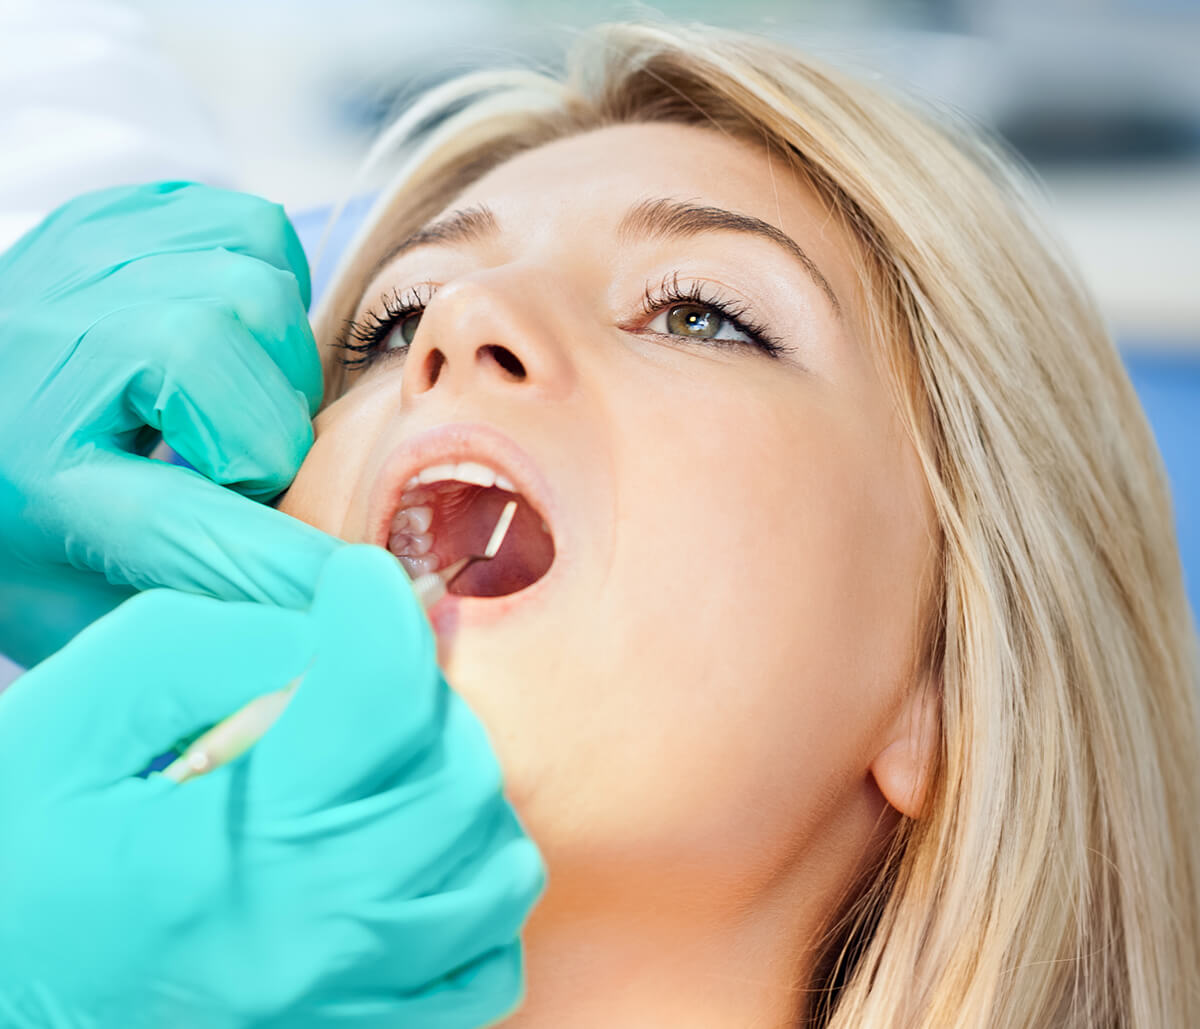 Explains the Signs of Periodontal Disease in Dentist in Houston, TX Area